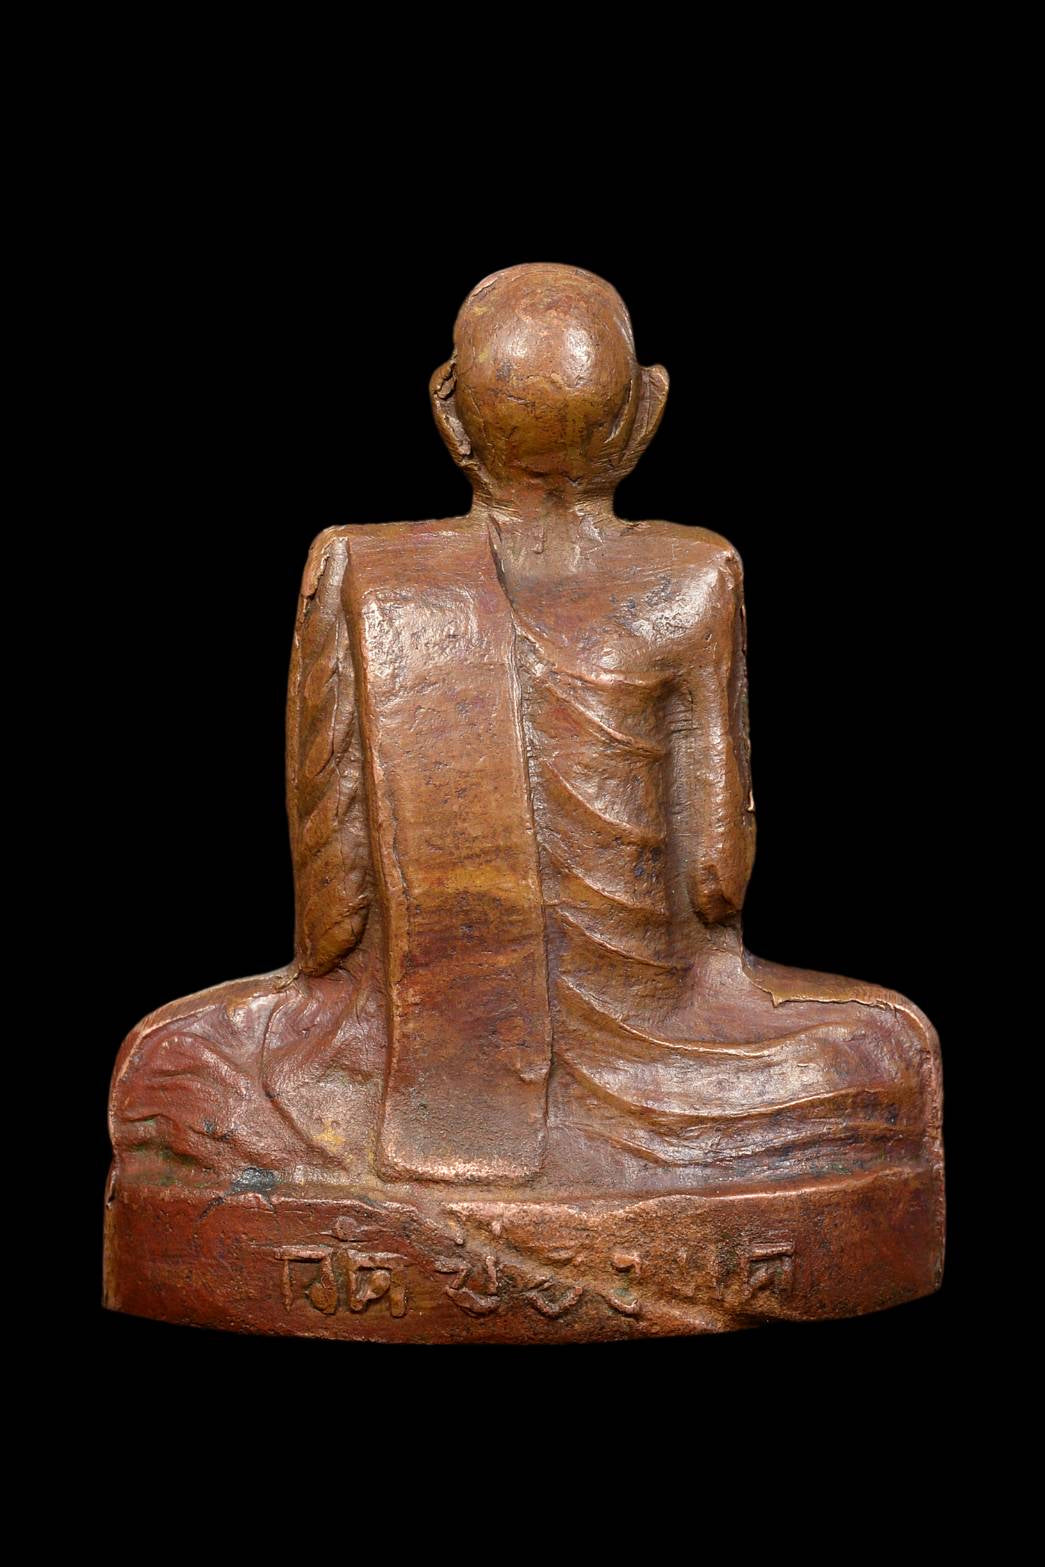 The Golden Mouth Aranhant's sitting posture, as depicted by Luang Phor Phrom in Pim Khao Kuang, is characterized by a wide lap . This particular representation, created in 2516, showcases the Grand style of Lp Phrom